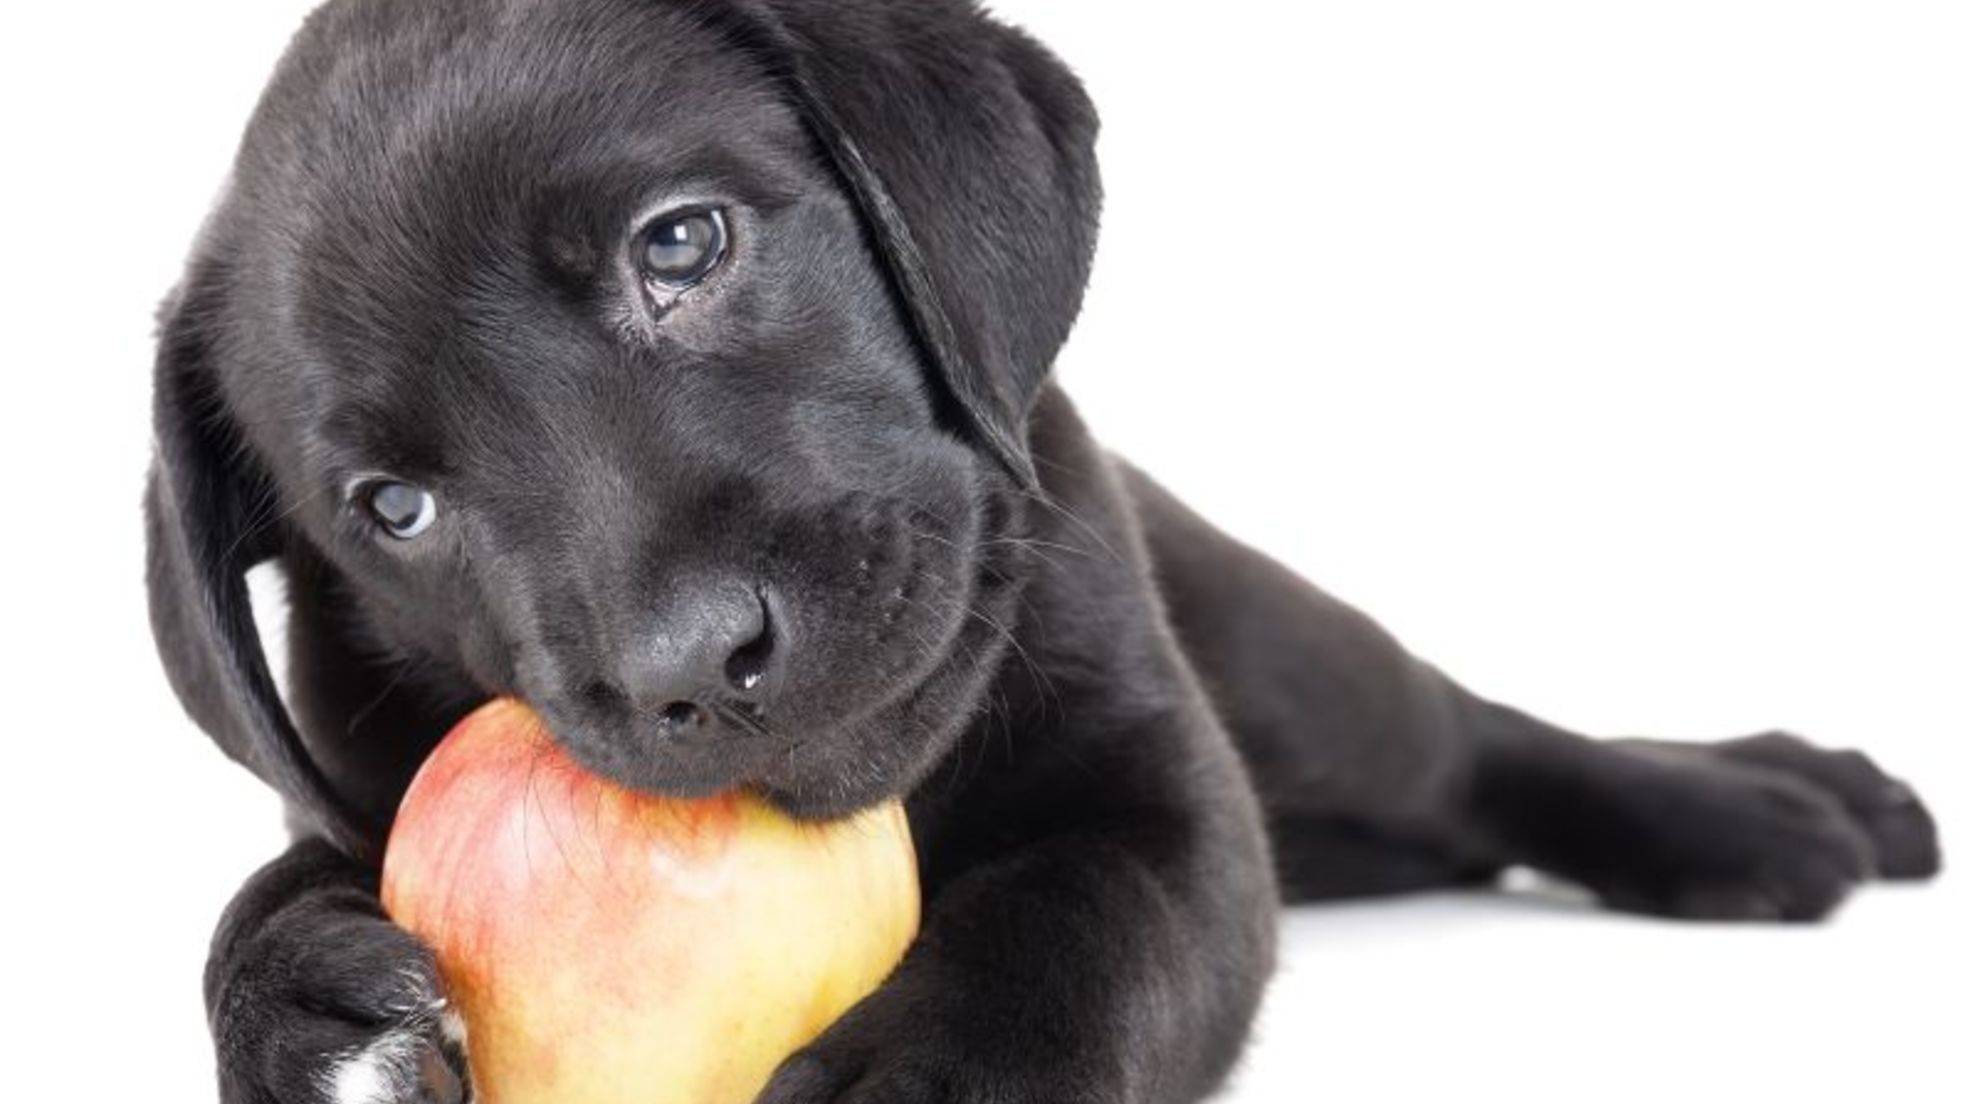 Are dogs allowed to eat fruit? And if so, which?